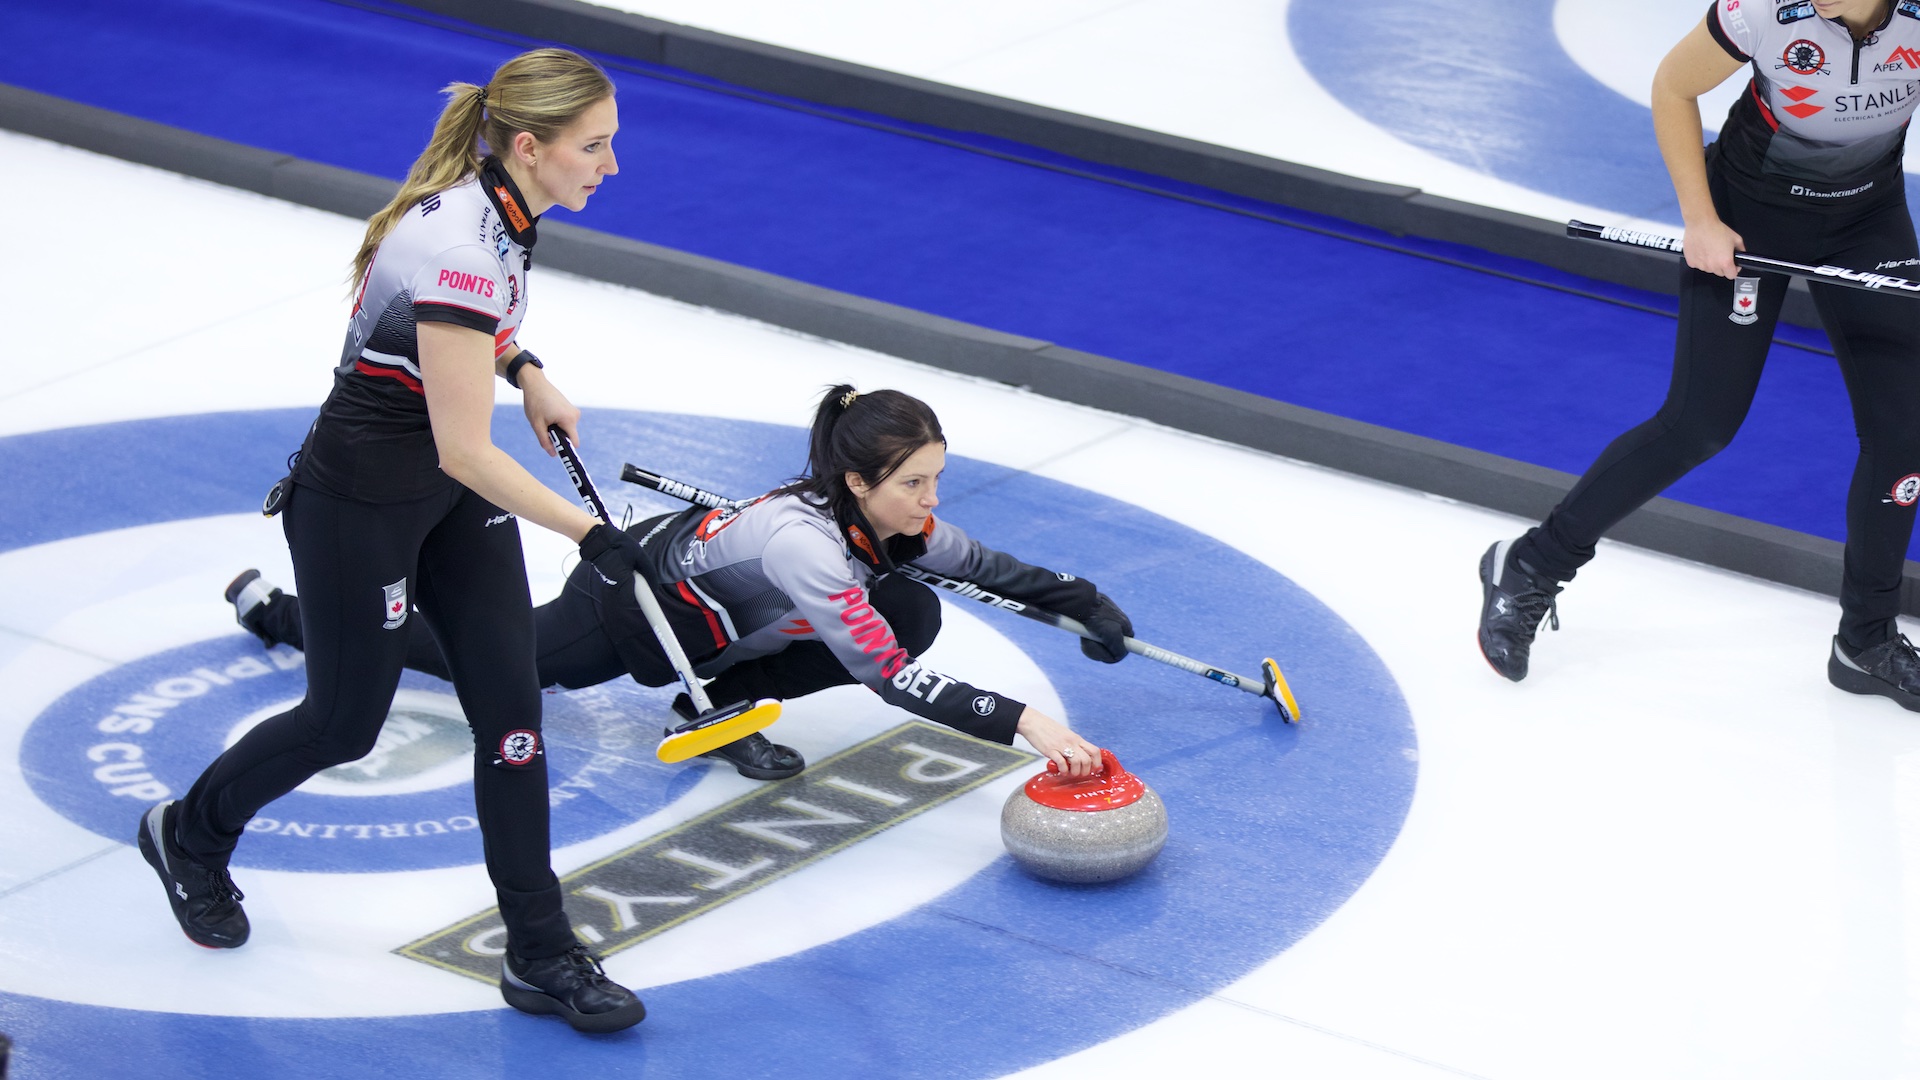 Grand Slam of Curling on X